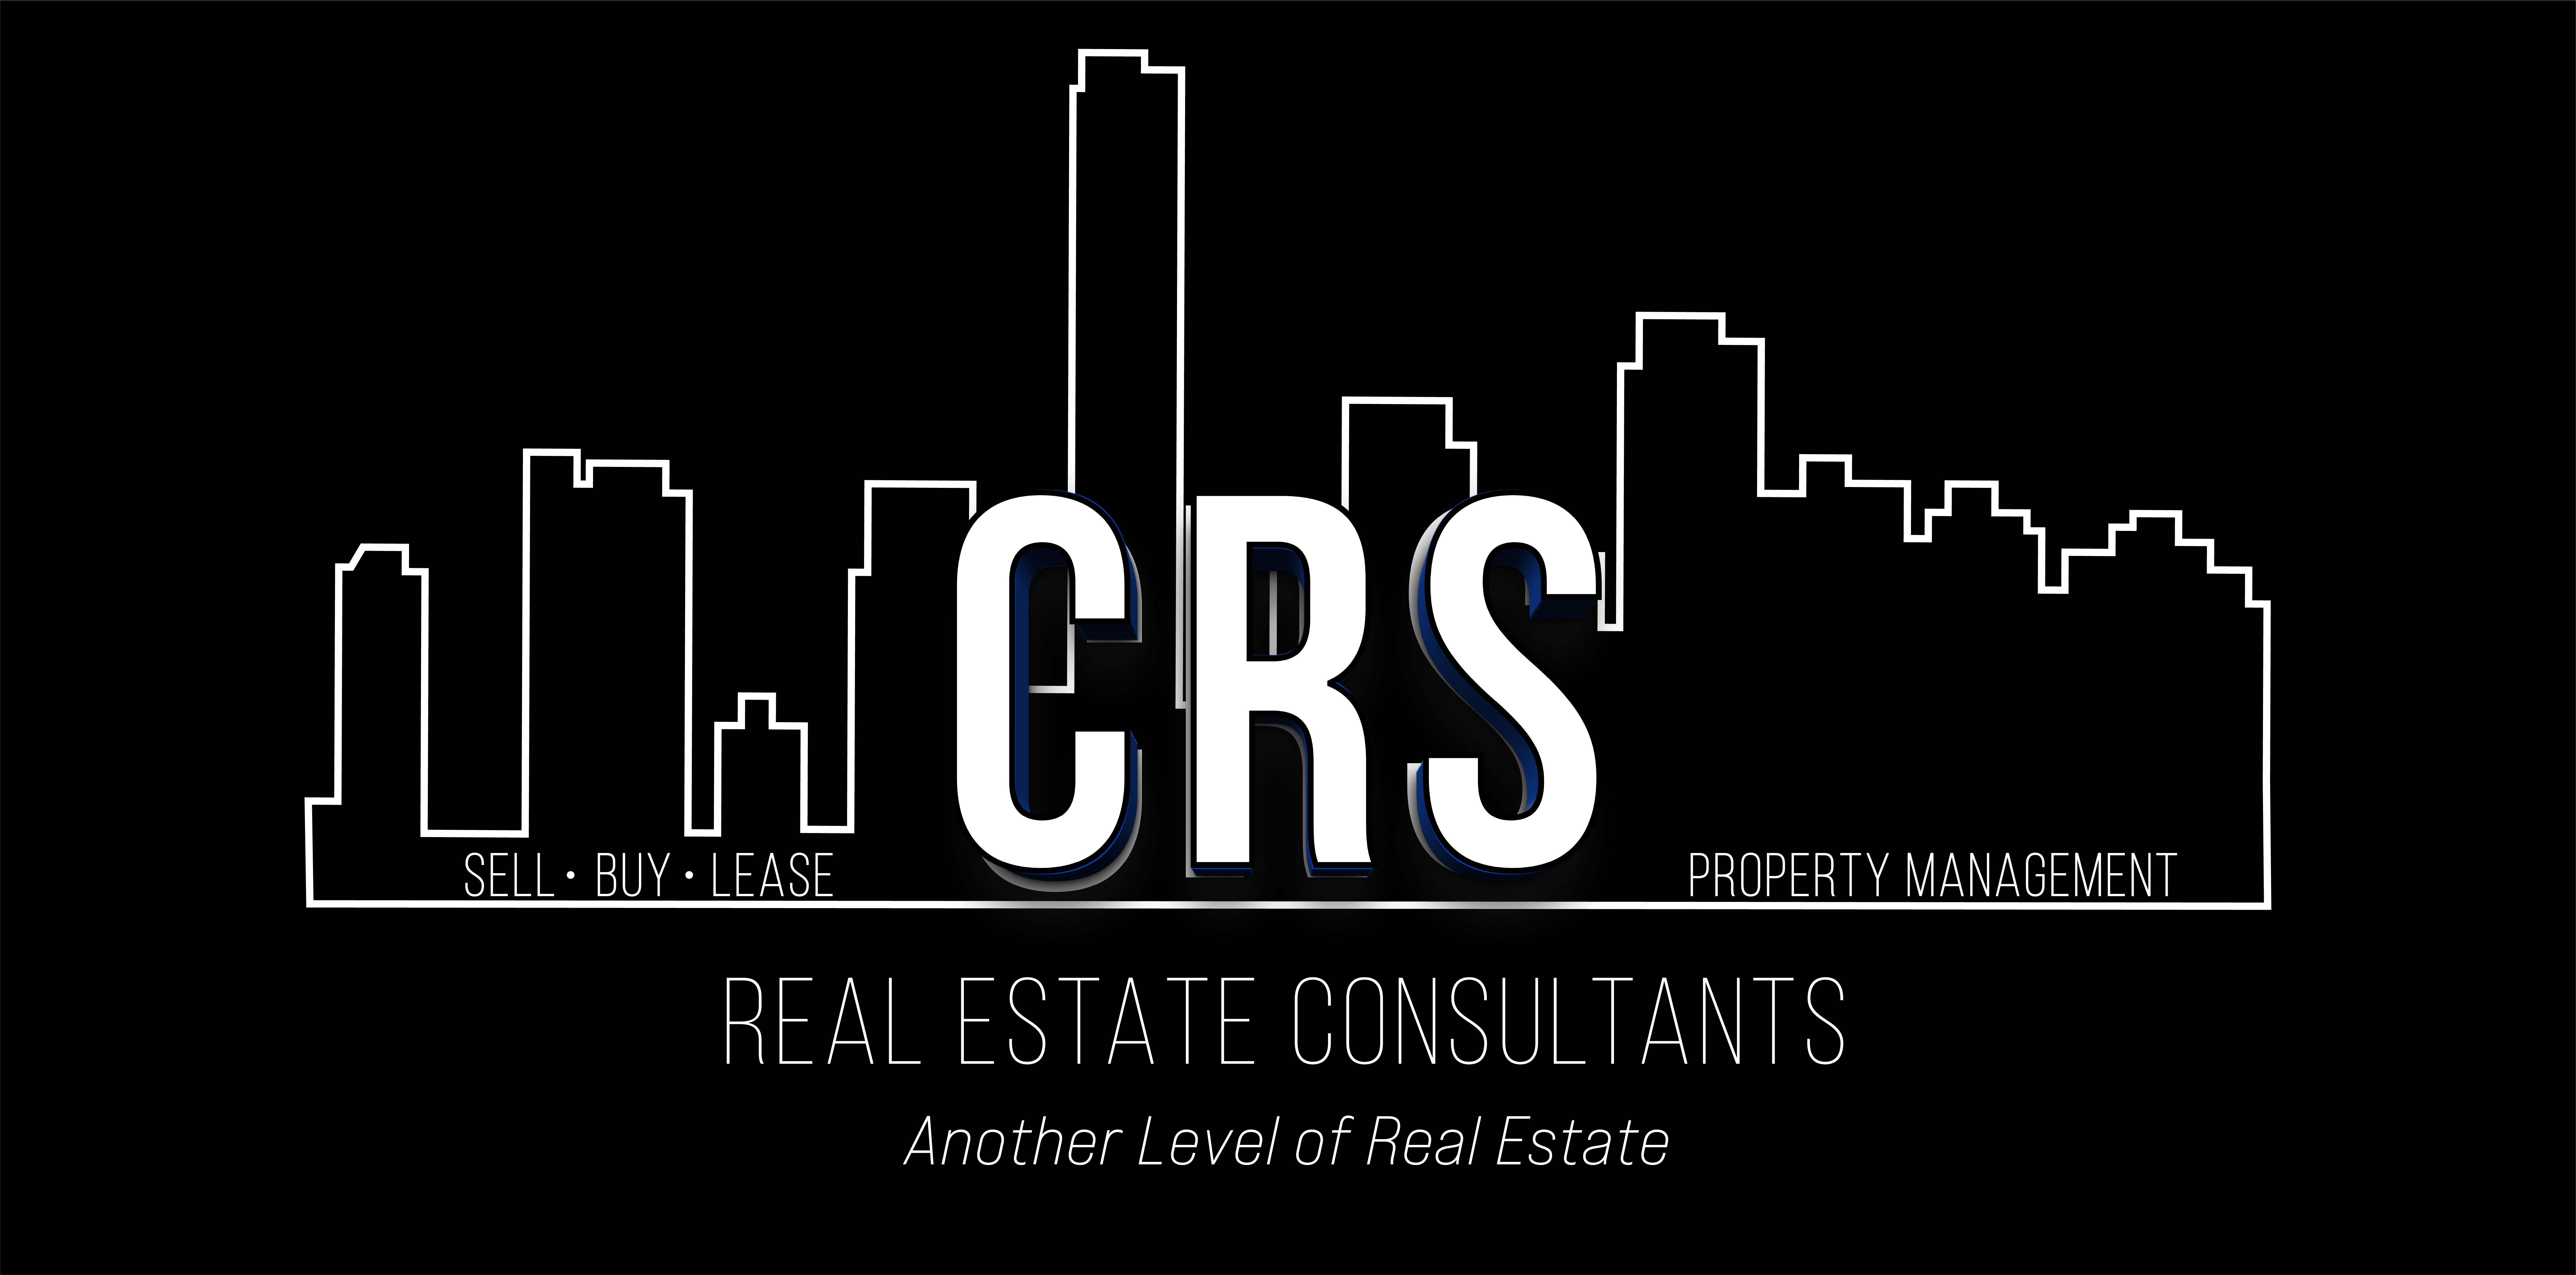 CRS REAL ESTATE CONSULTANTS